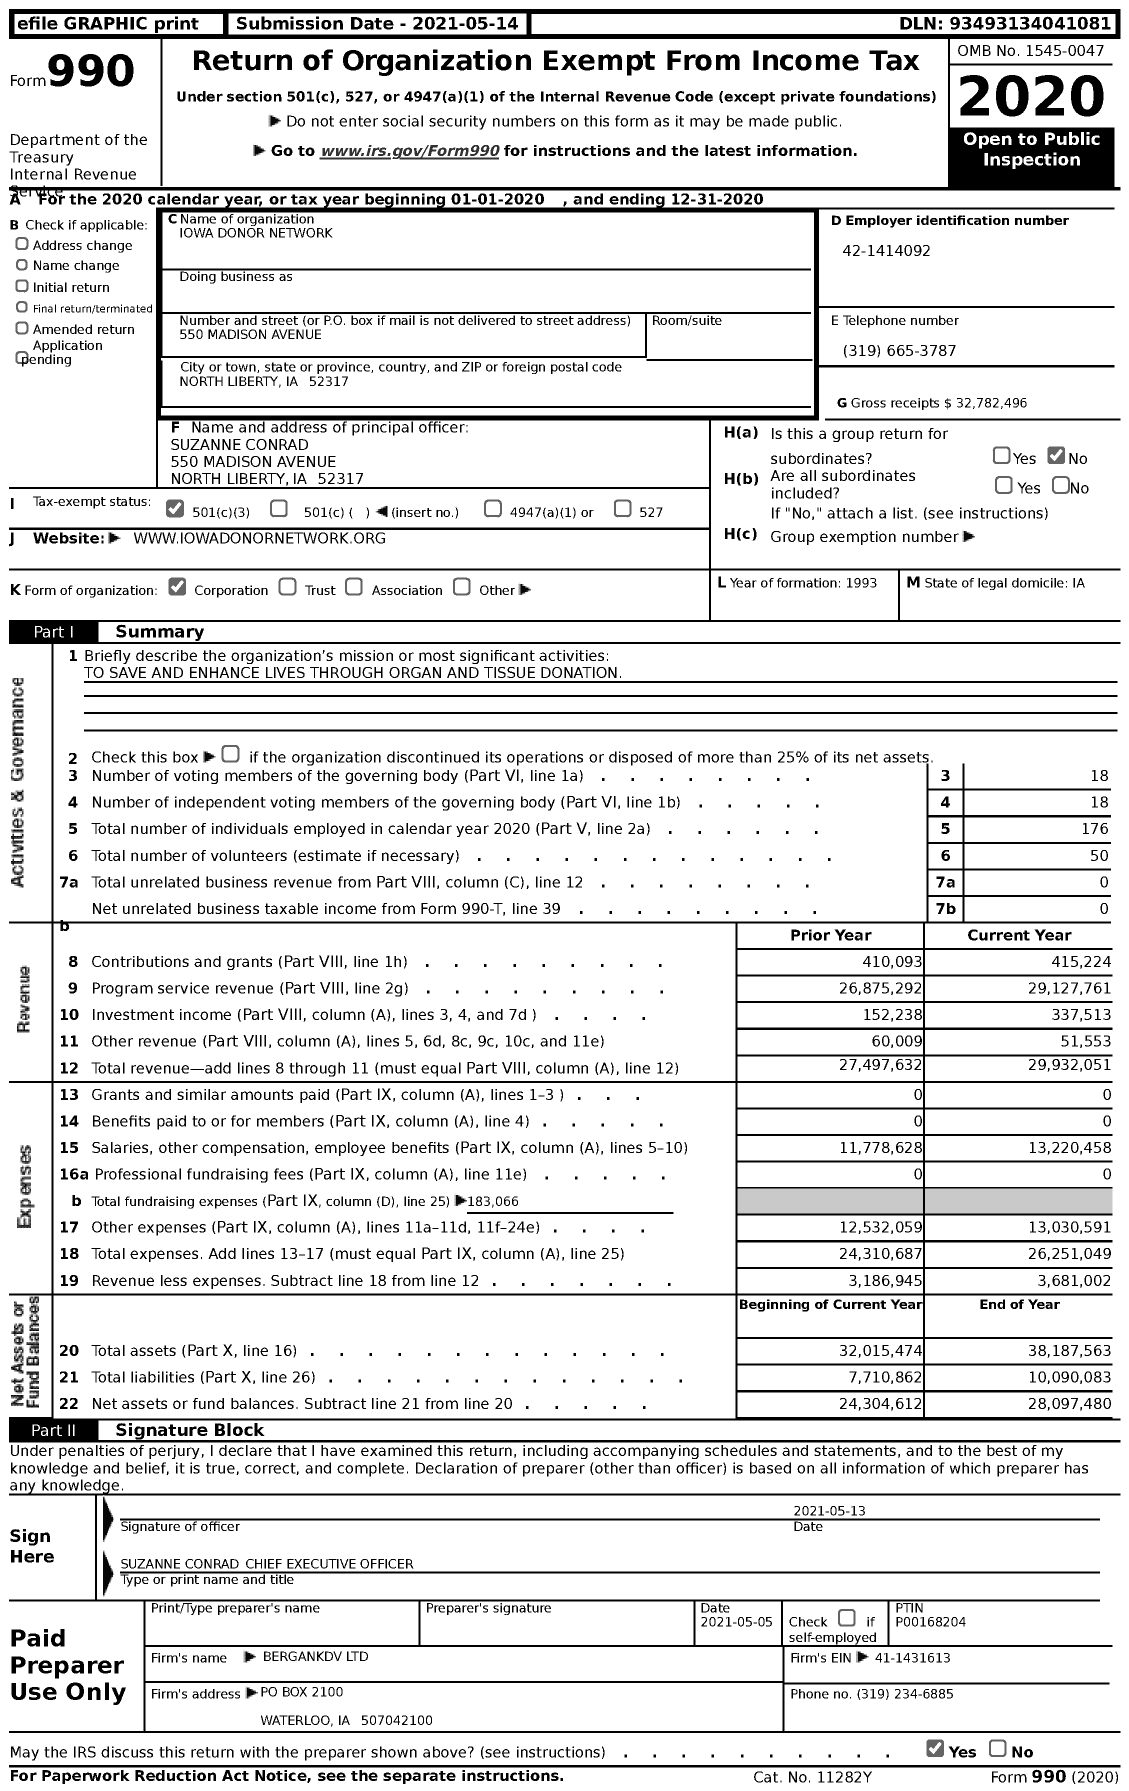 Image of first page of 2020 Form 990 for Iowa Donor Network (IDN)